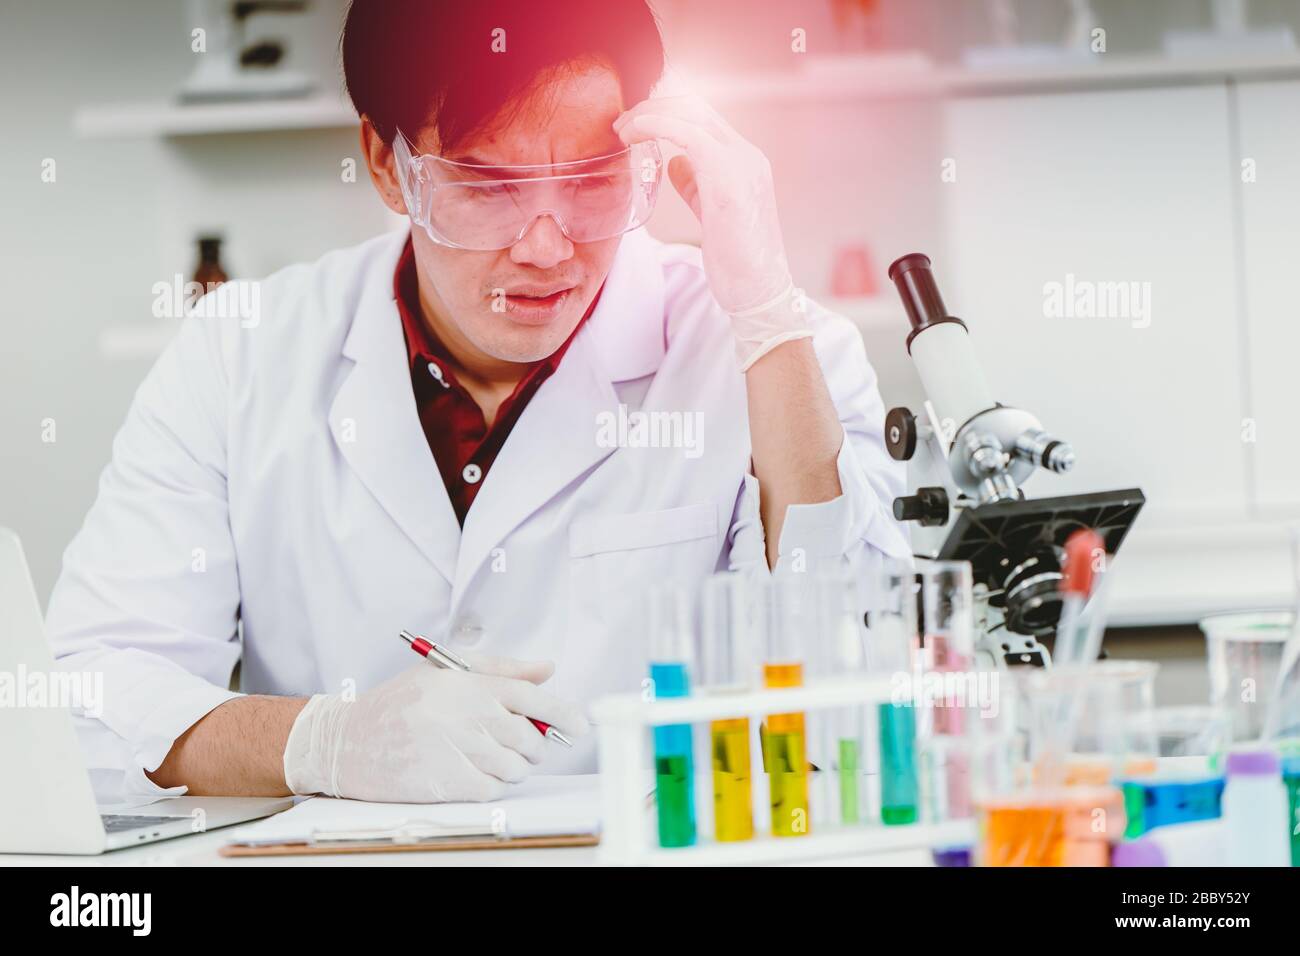 Scientist hardworking headache illness during longtime working in medical lab test Stock Photo